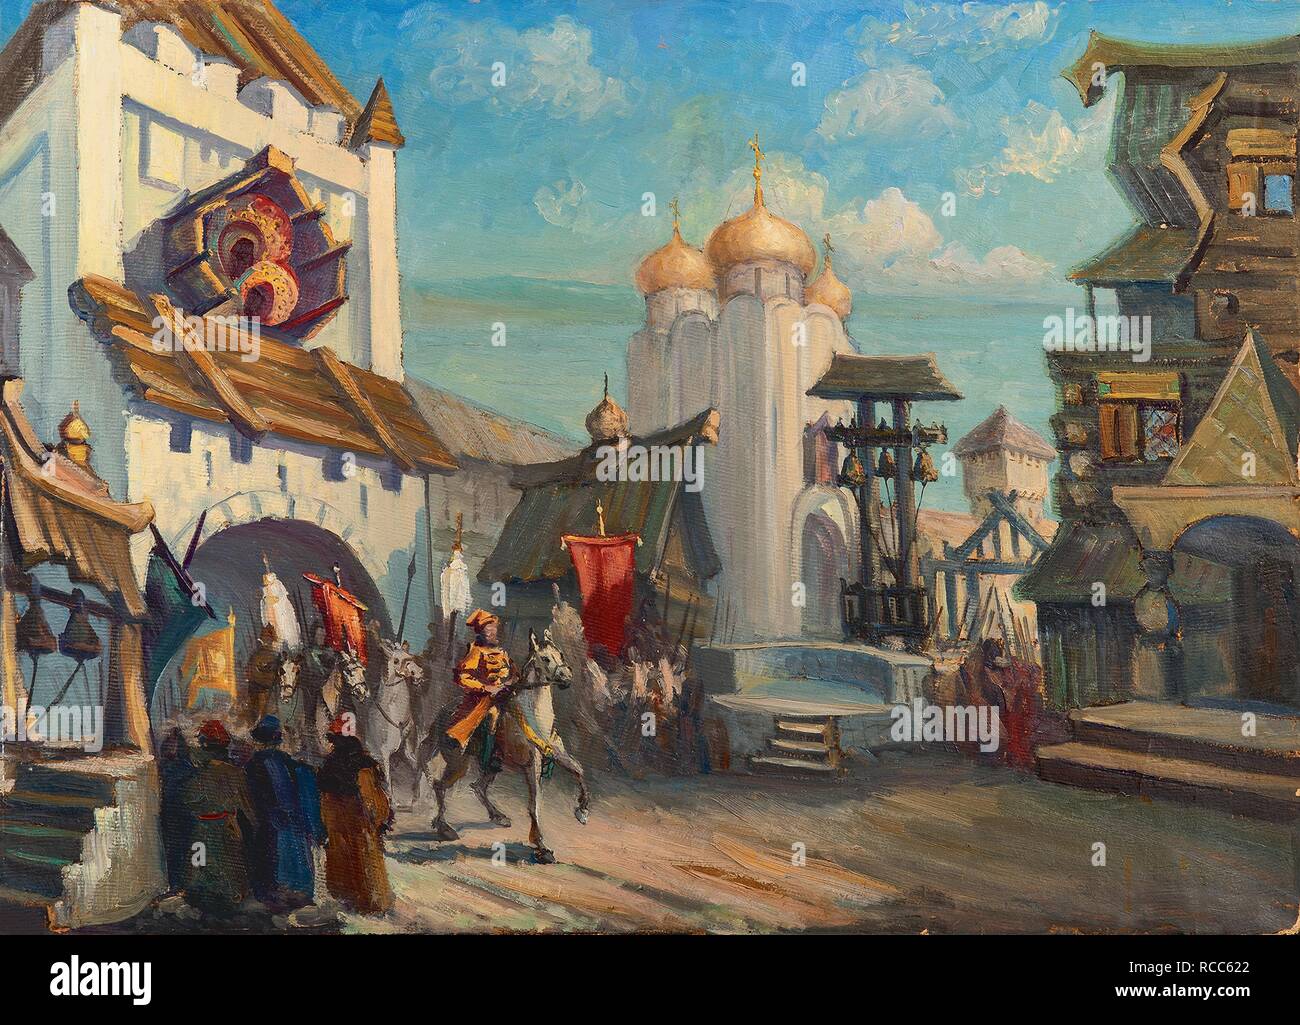 Stage design for the opera The Tsar's bride by N. Rimsky-Korsakov. Museum: PRIVATE COLLECTION. Author: Bomshtein, Alexander. Stock Photo